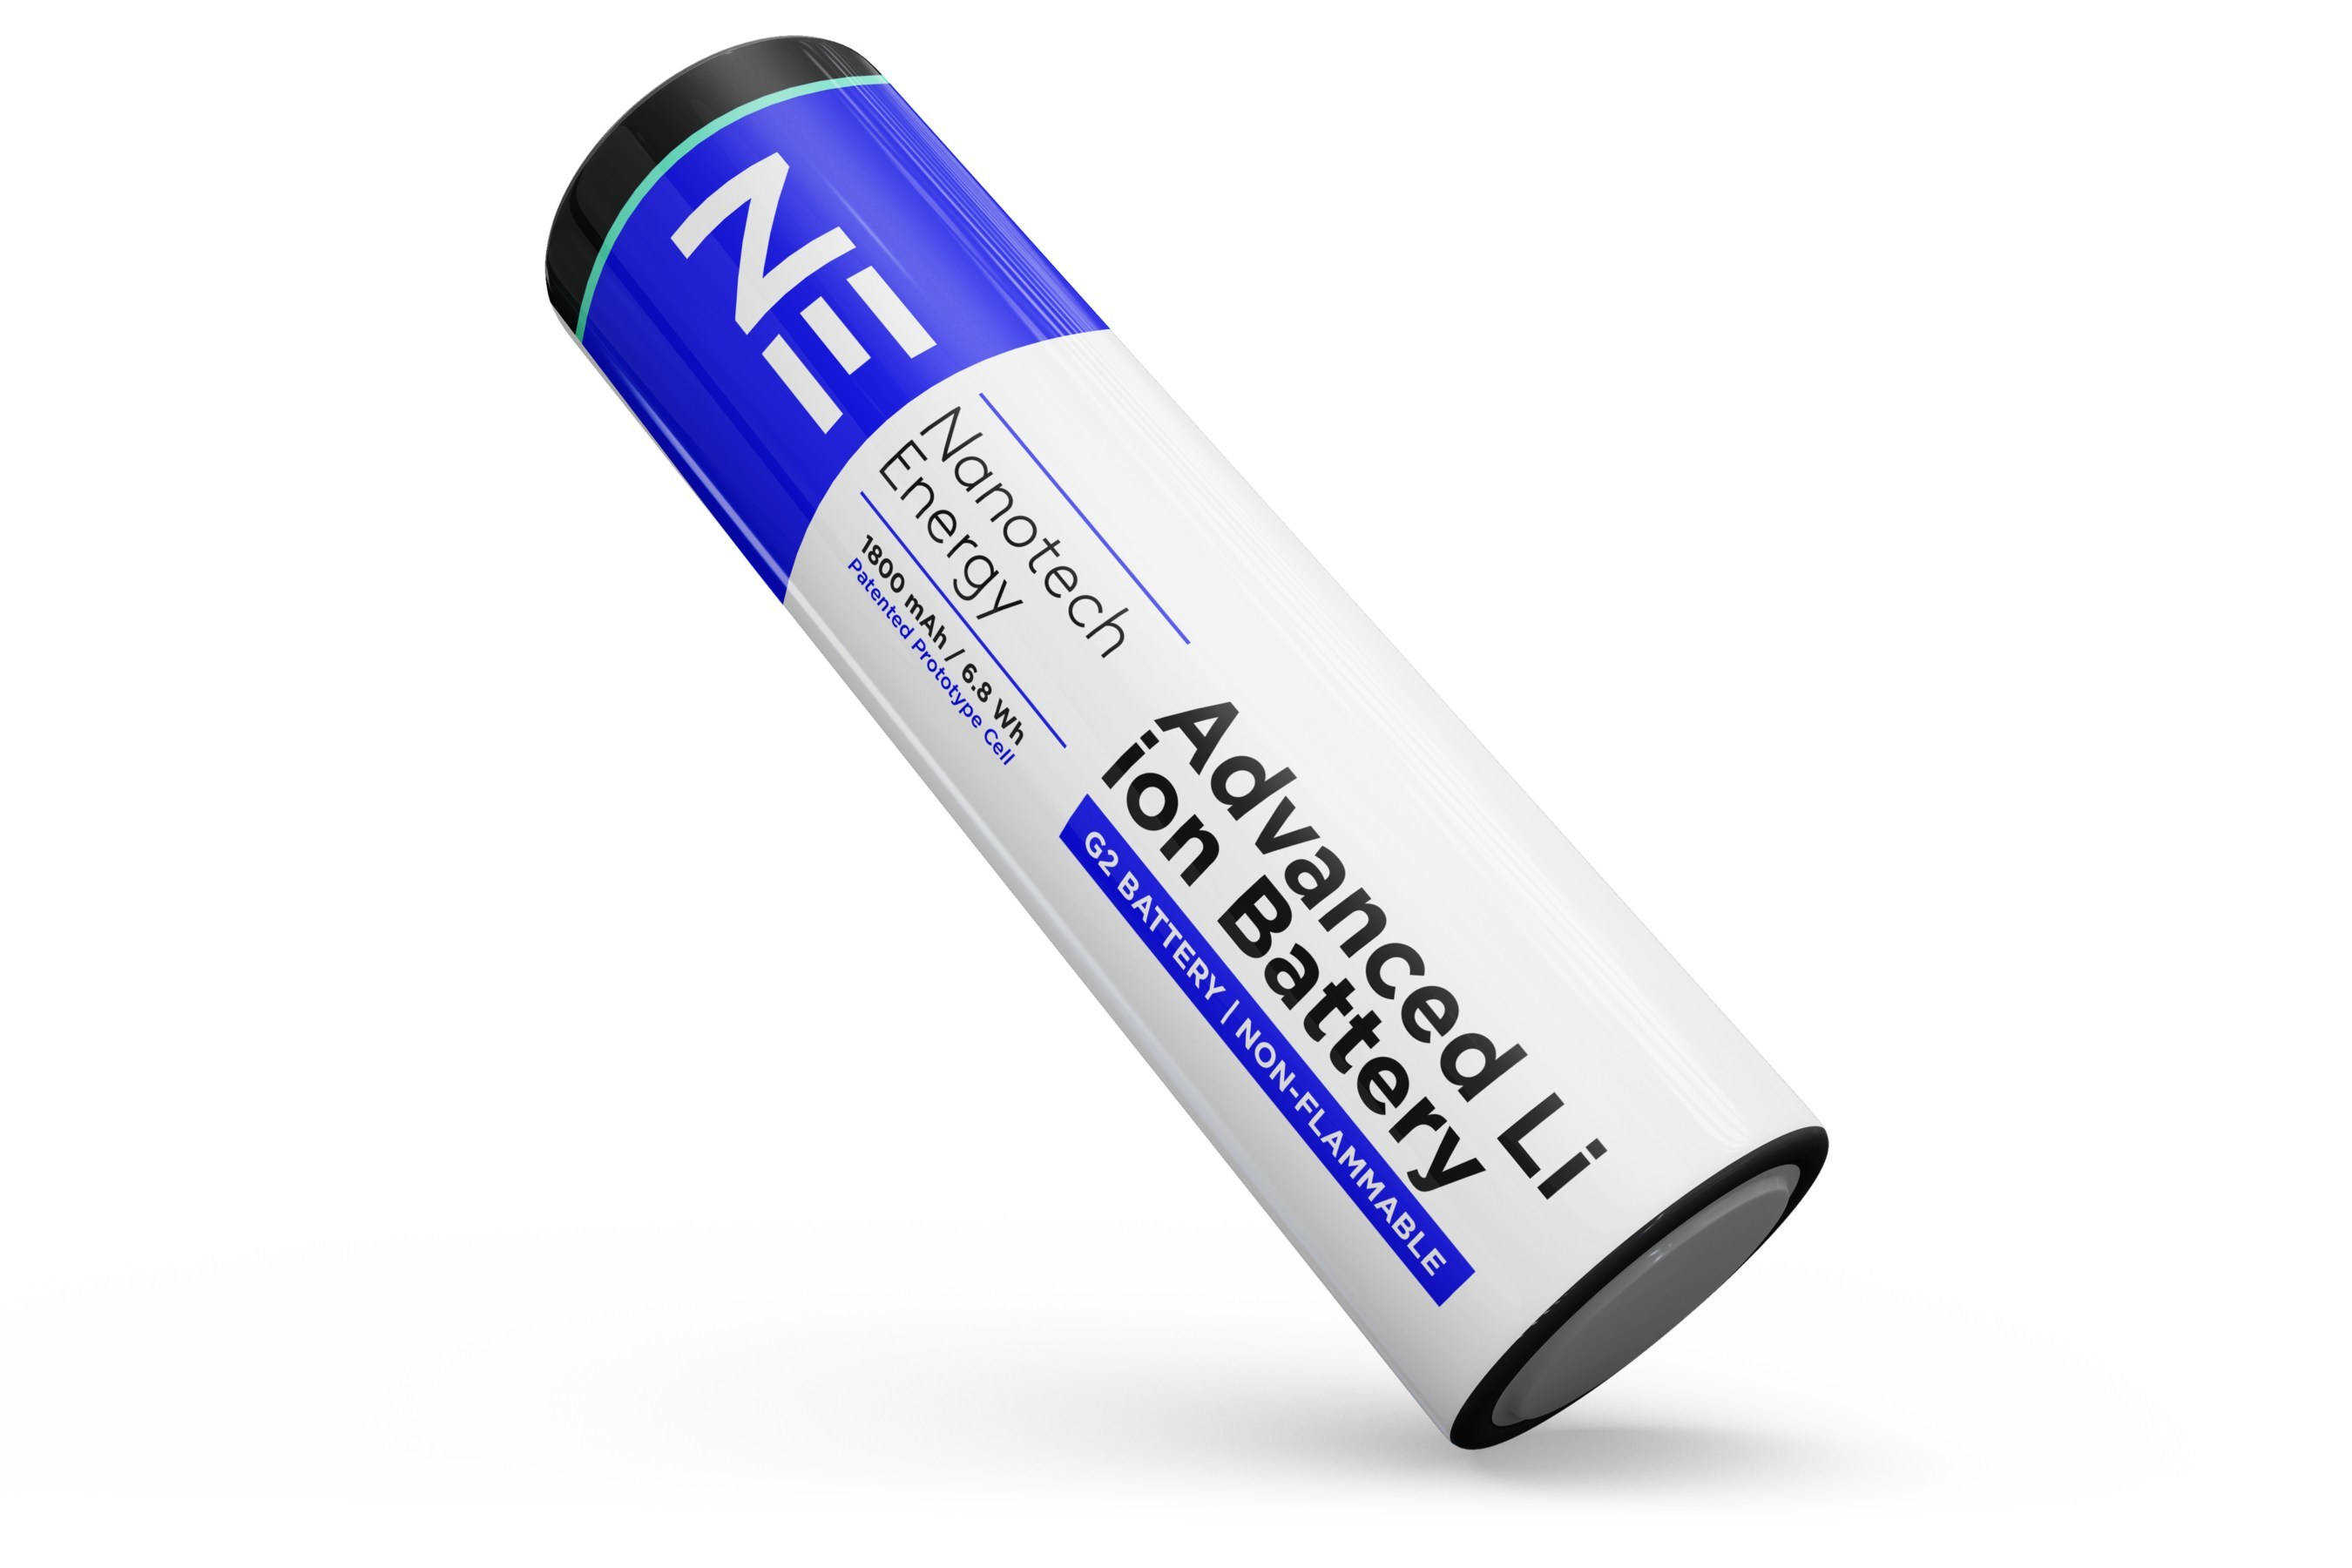 The Graphene Lithium battery non-flammable has a promising future